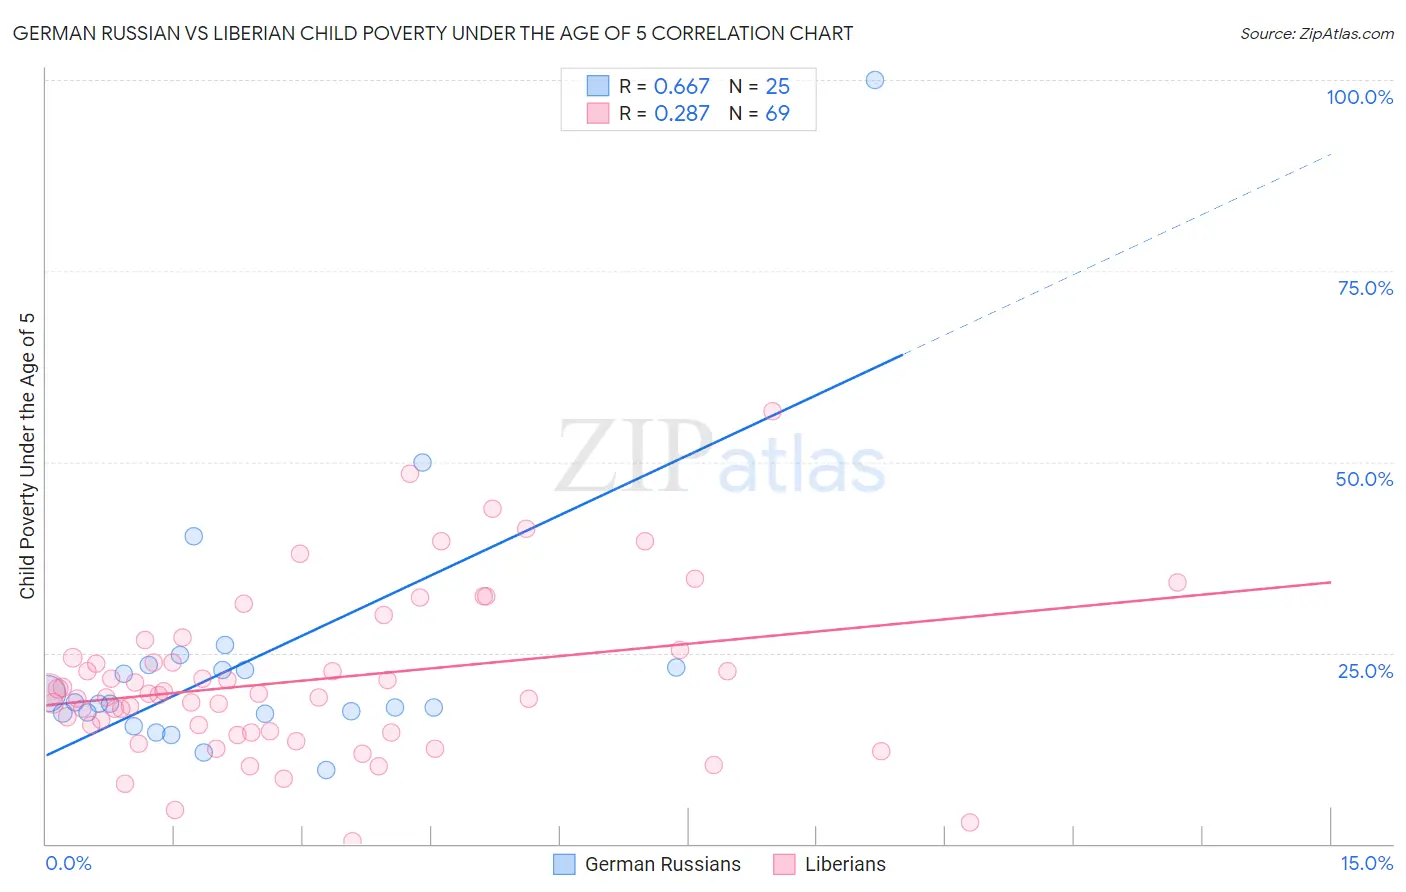 German Russian vs Liberian Child Poverty Under the Age of 5